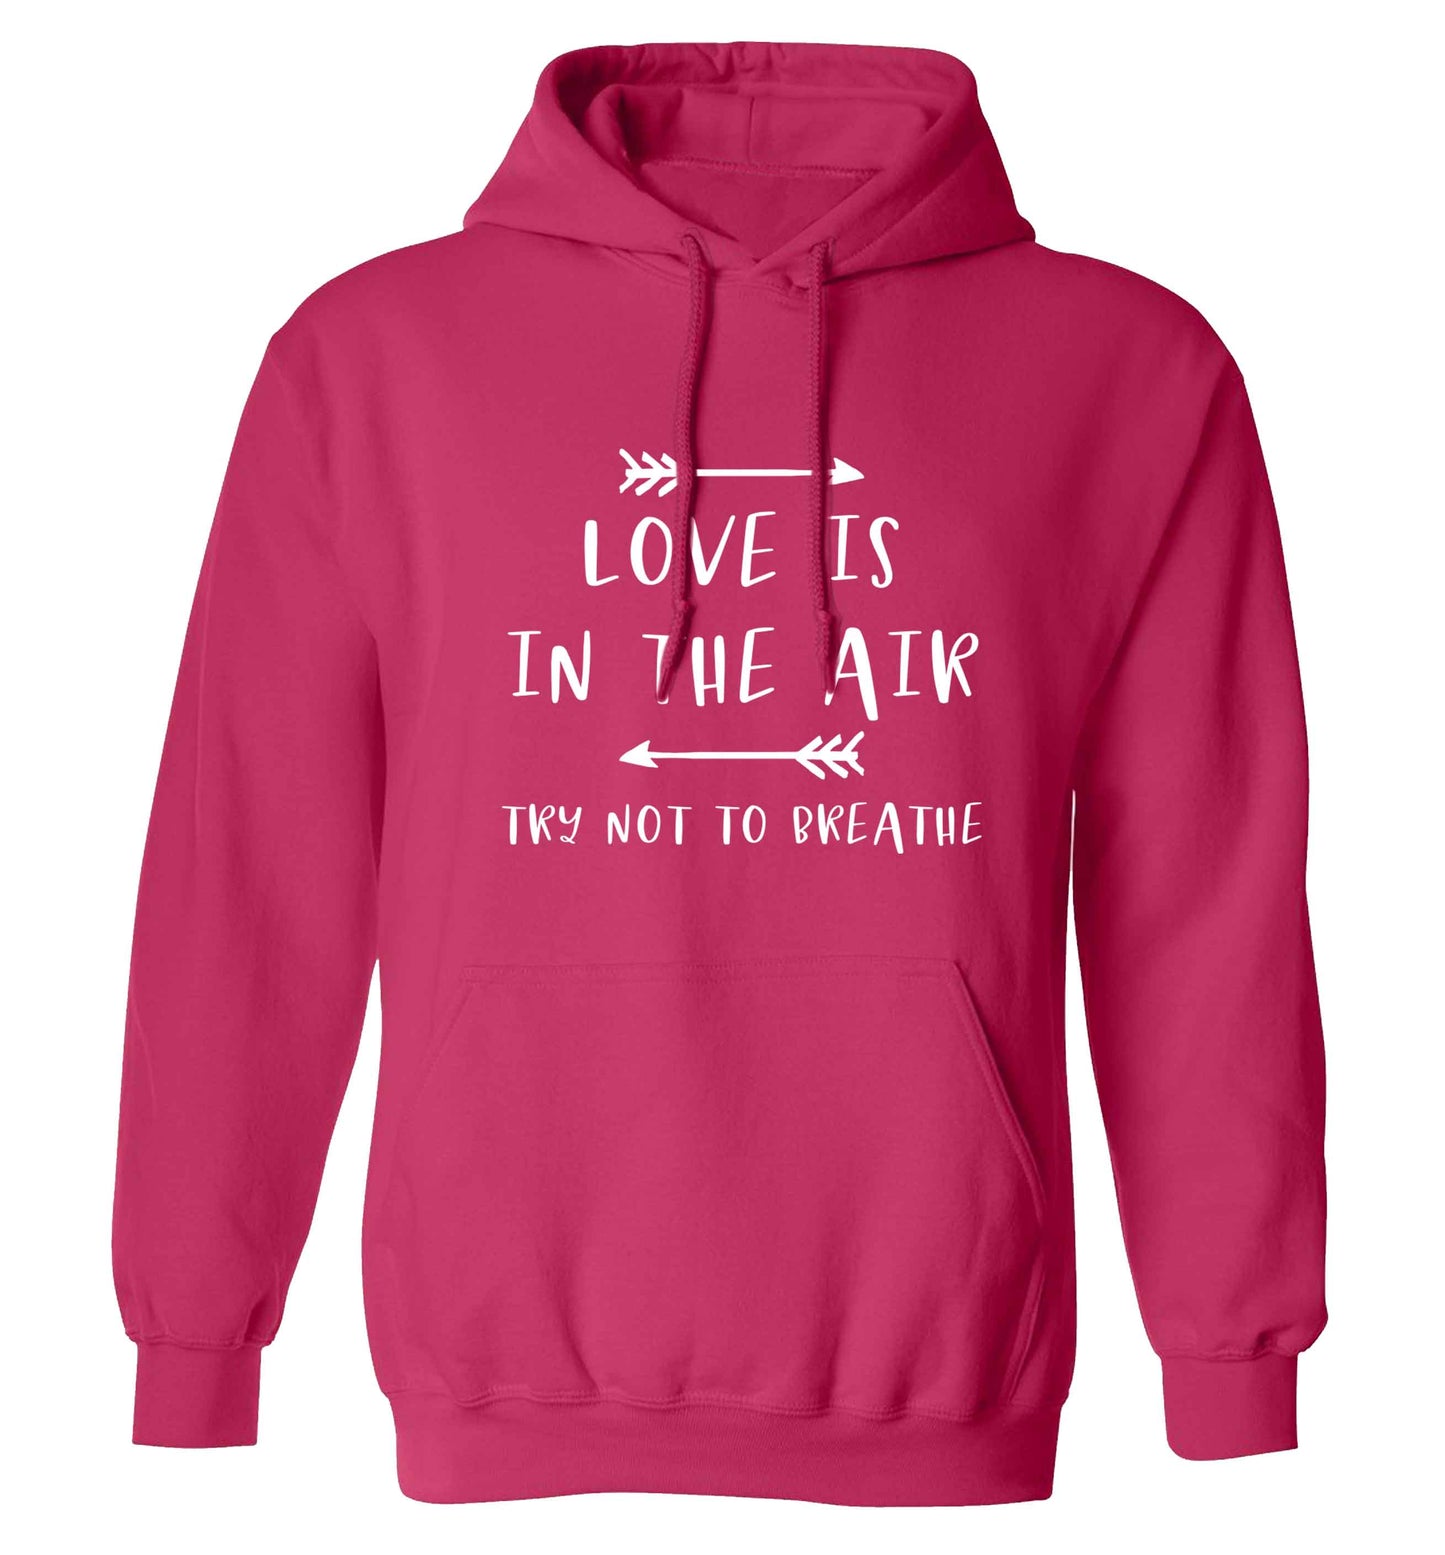 Love is in the air try not to breathe adults unisex pink hoodie 2XL